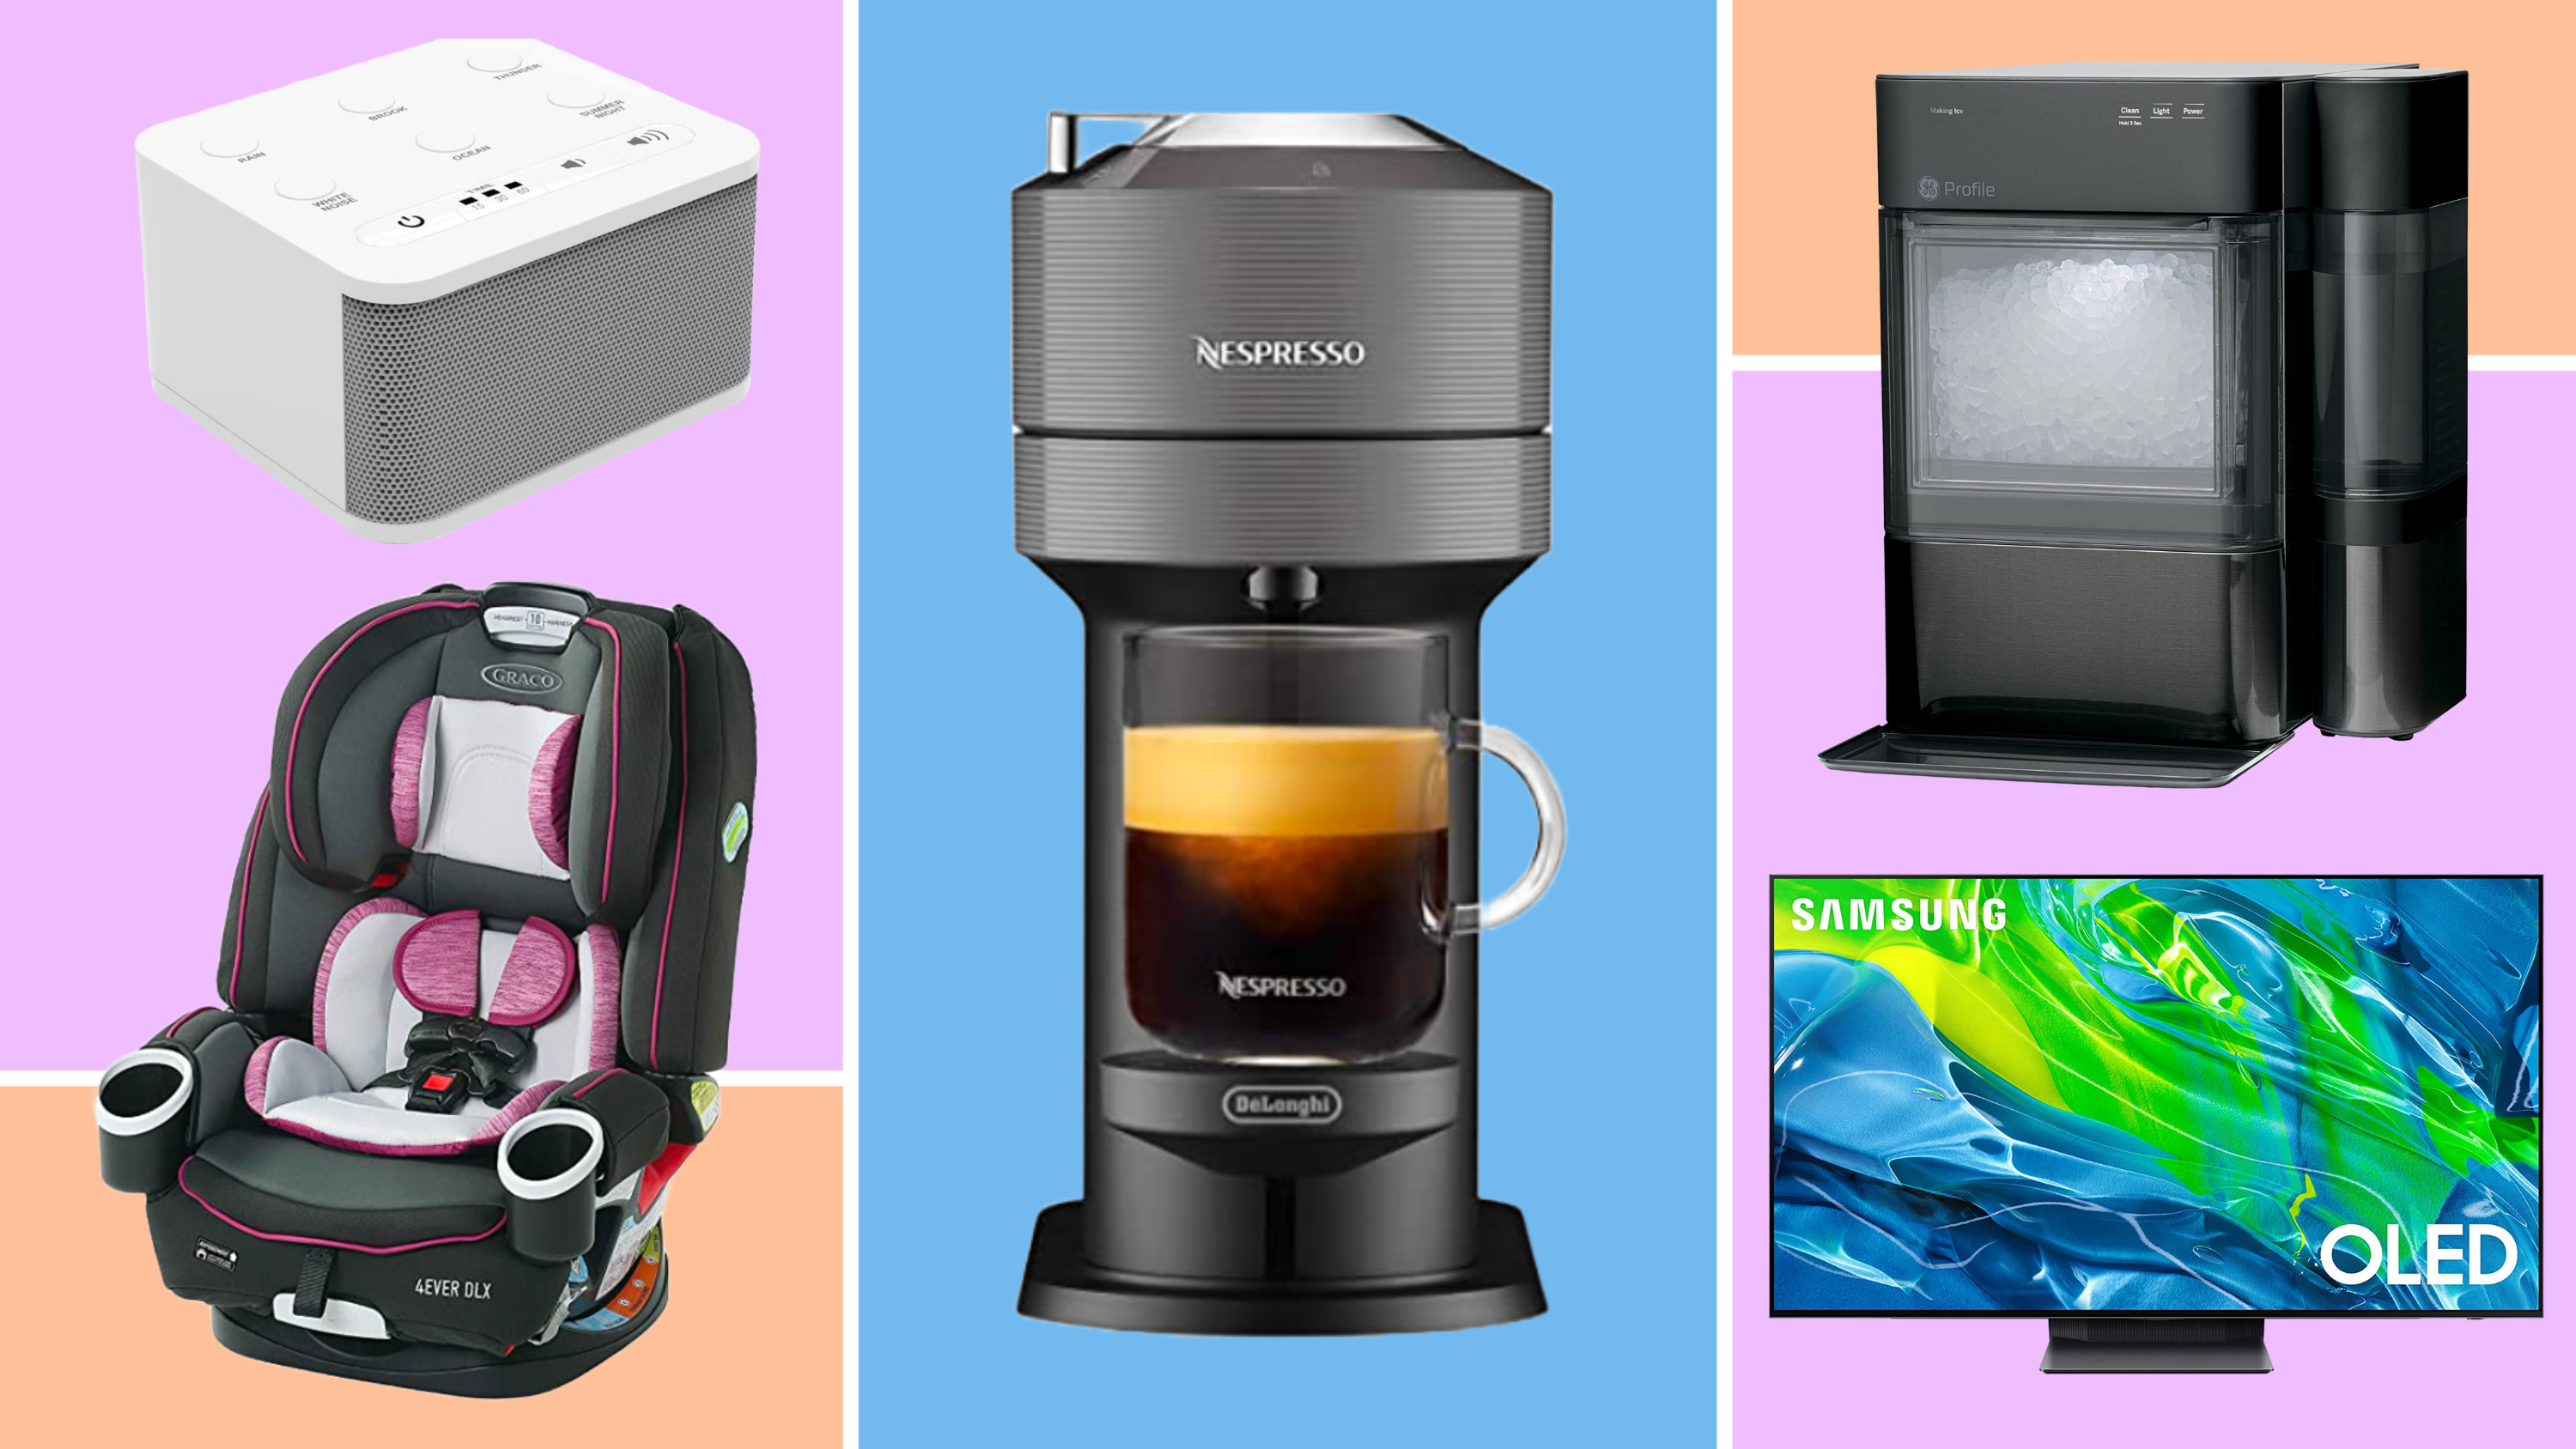 Updated daily: Here are the 10 best Amazon deals you can get on Nespresso, Samsung and GE